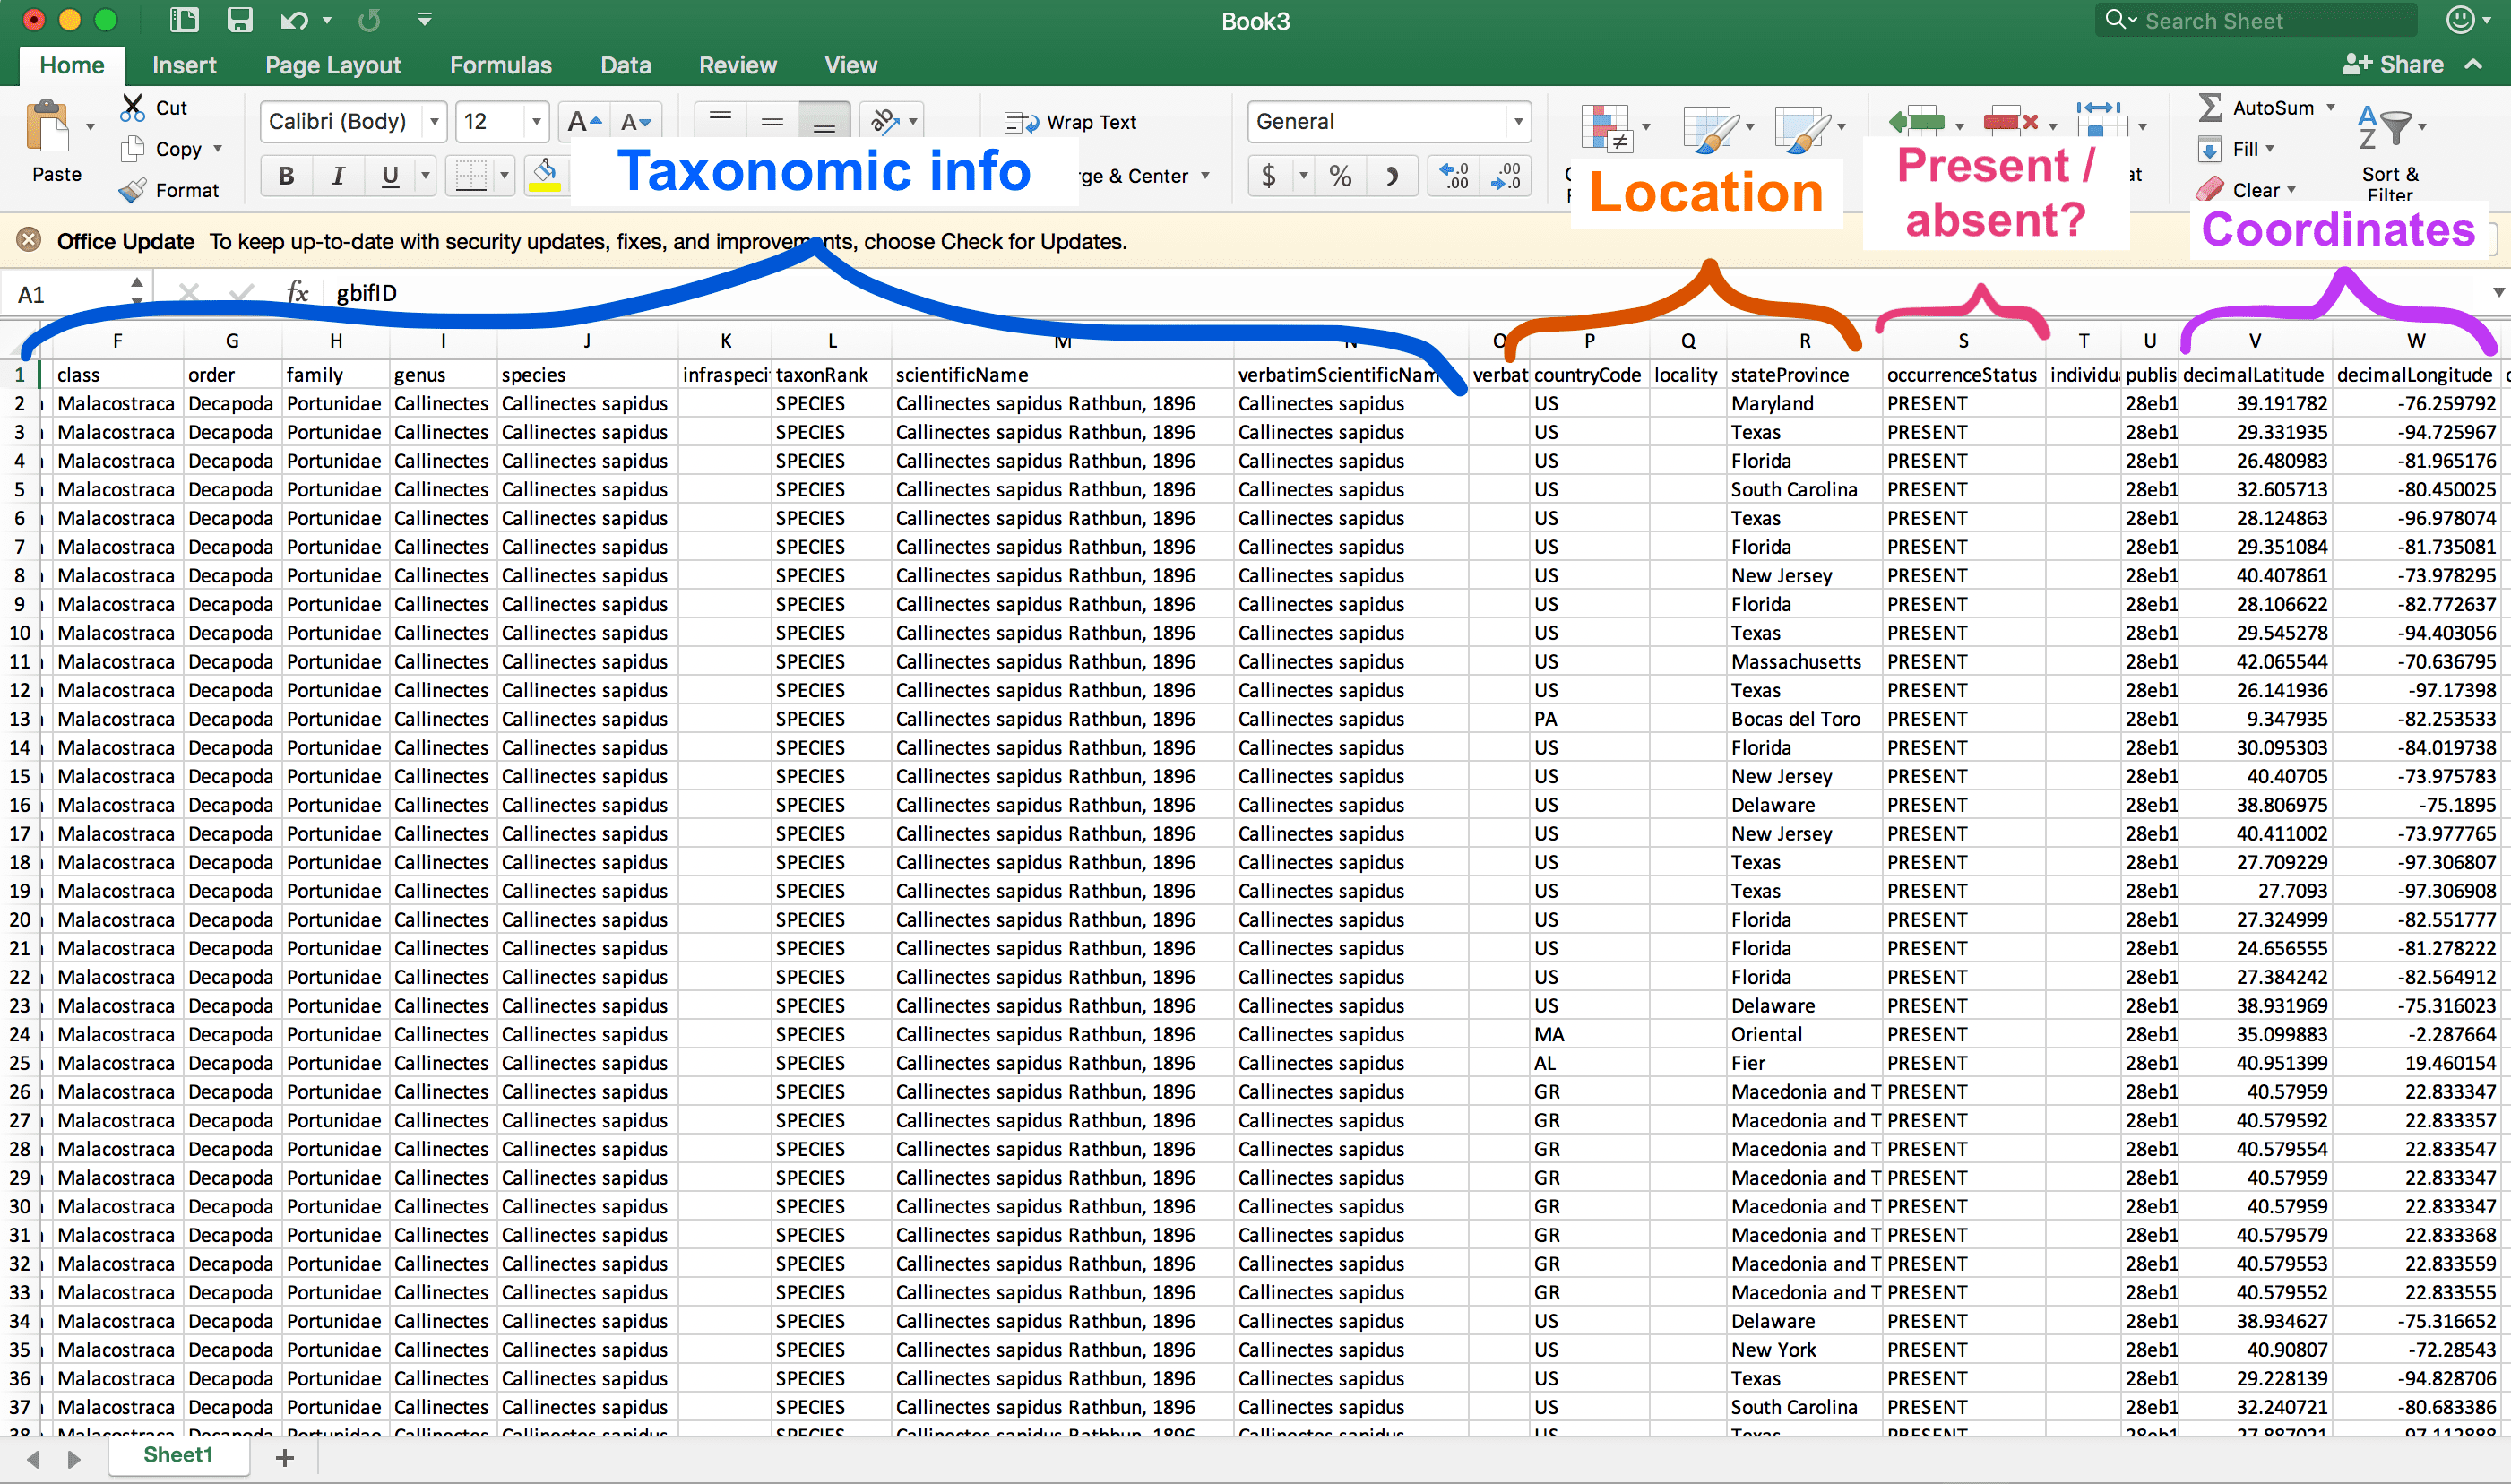 Image of occurrence data open in Microsoft Excel. The columns that are visible describe taxonomic information and the countries, provinces, and coordinates where blue crabs were observed. There’s also a column that indicates whether the species was recorded as present or absent.